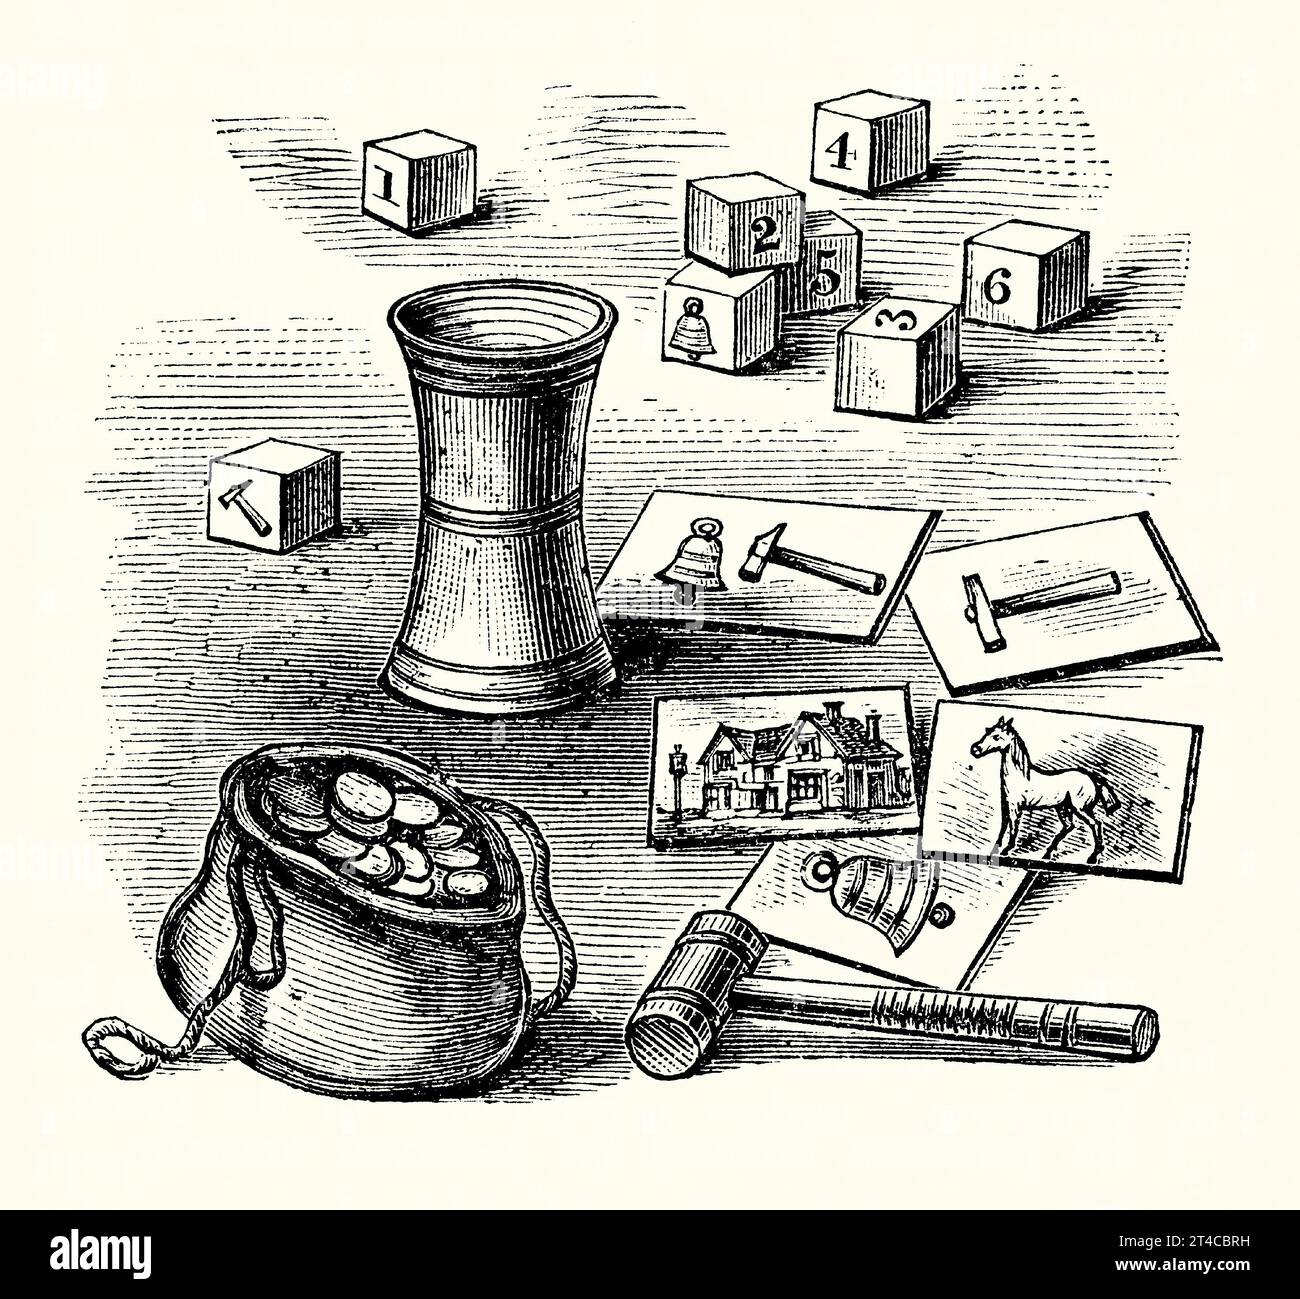 An old engraving of the game of ‘Bell and Hammer’ or ‘Schimmel’. It is from Victorian book of the 1890s on sports, games and pastimes. Bell and Hammer (or ‘Whitehorse’ – in Germany ‘Glocke und Hammer’ or Schimmel) is a dice game, which was popular in Europe in the 19th and early 20th centuries. The game’s equipment consists of 5 illustrated cards (bell and hammer, white horse, inn, hammer and bell), wood or ivory cubes or dice (numbered or with a bell or hammer motif but also with blank sides), a dice box and a bag of counters. Stock Photo